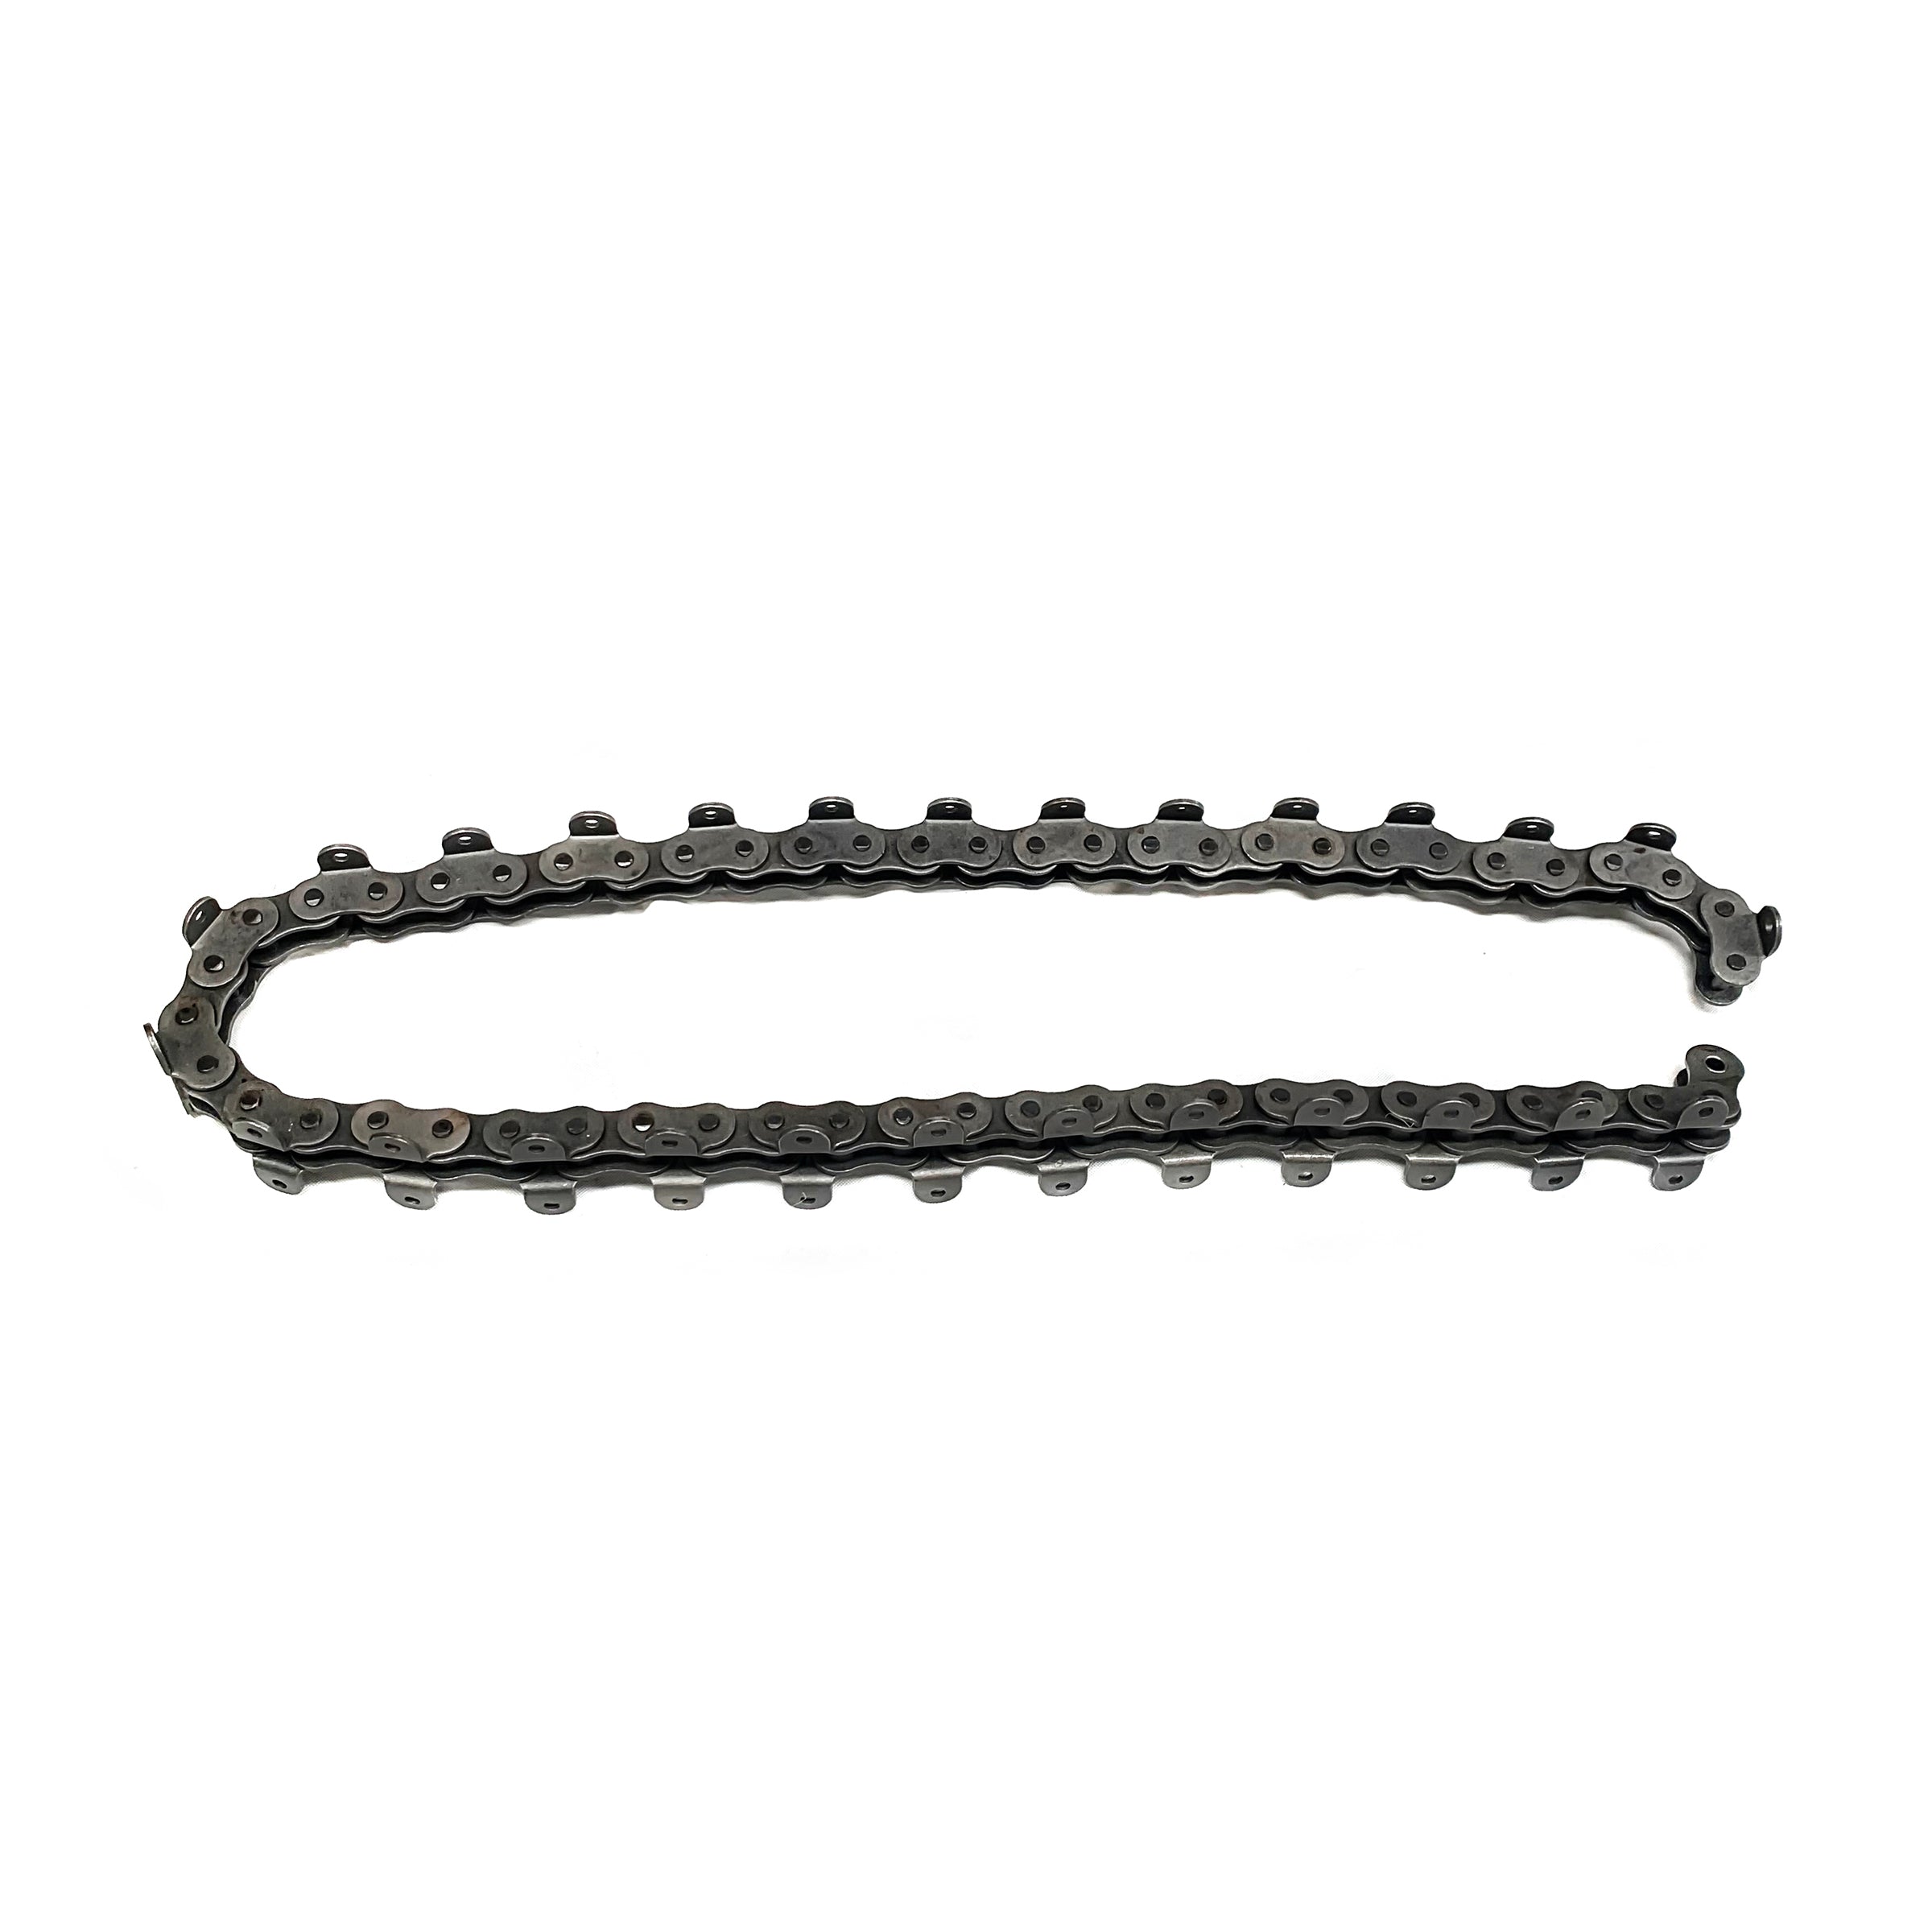 Paddock walk behind trencher spare part chain